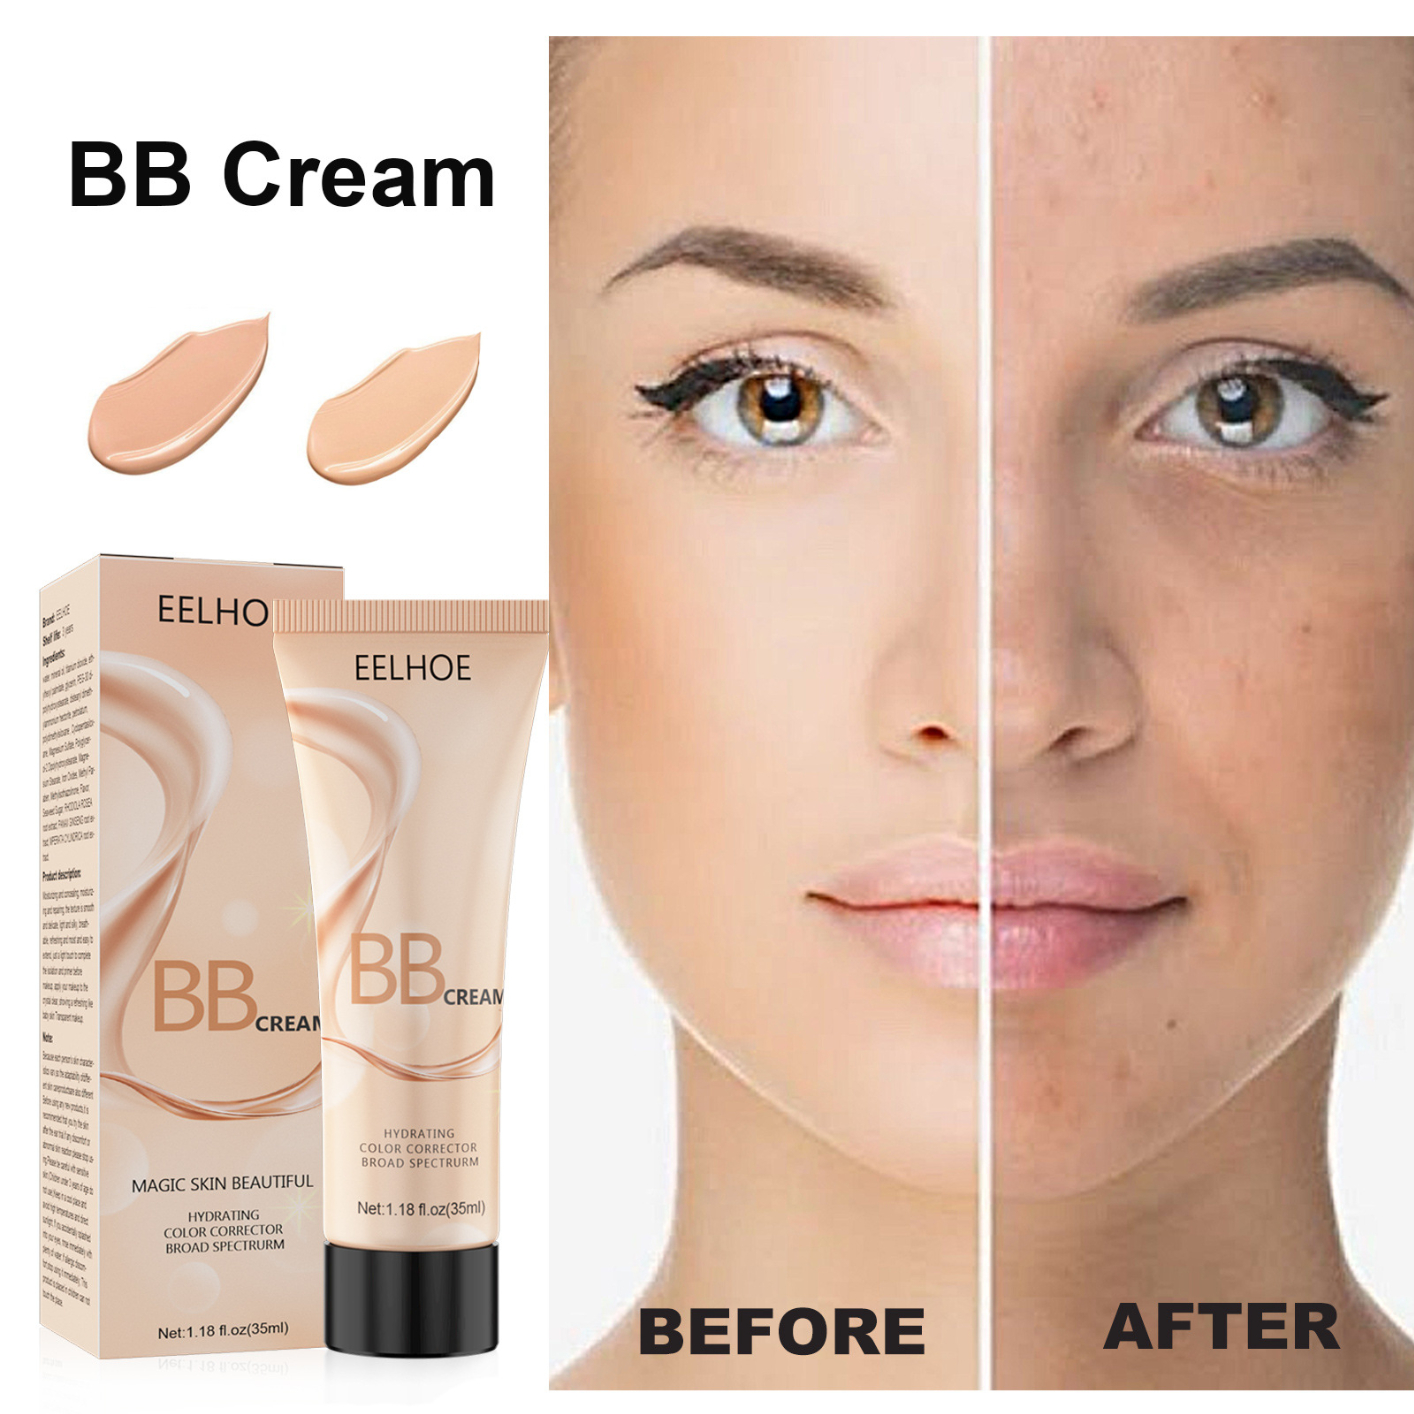 Hydrating BB Cream, 35ml Full-Coverage Foundation&Concealer, Color Correcting Cream, Tinted Moisturizer BB Cream for All Skin Types - Evens Skin Tone